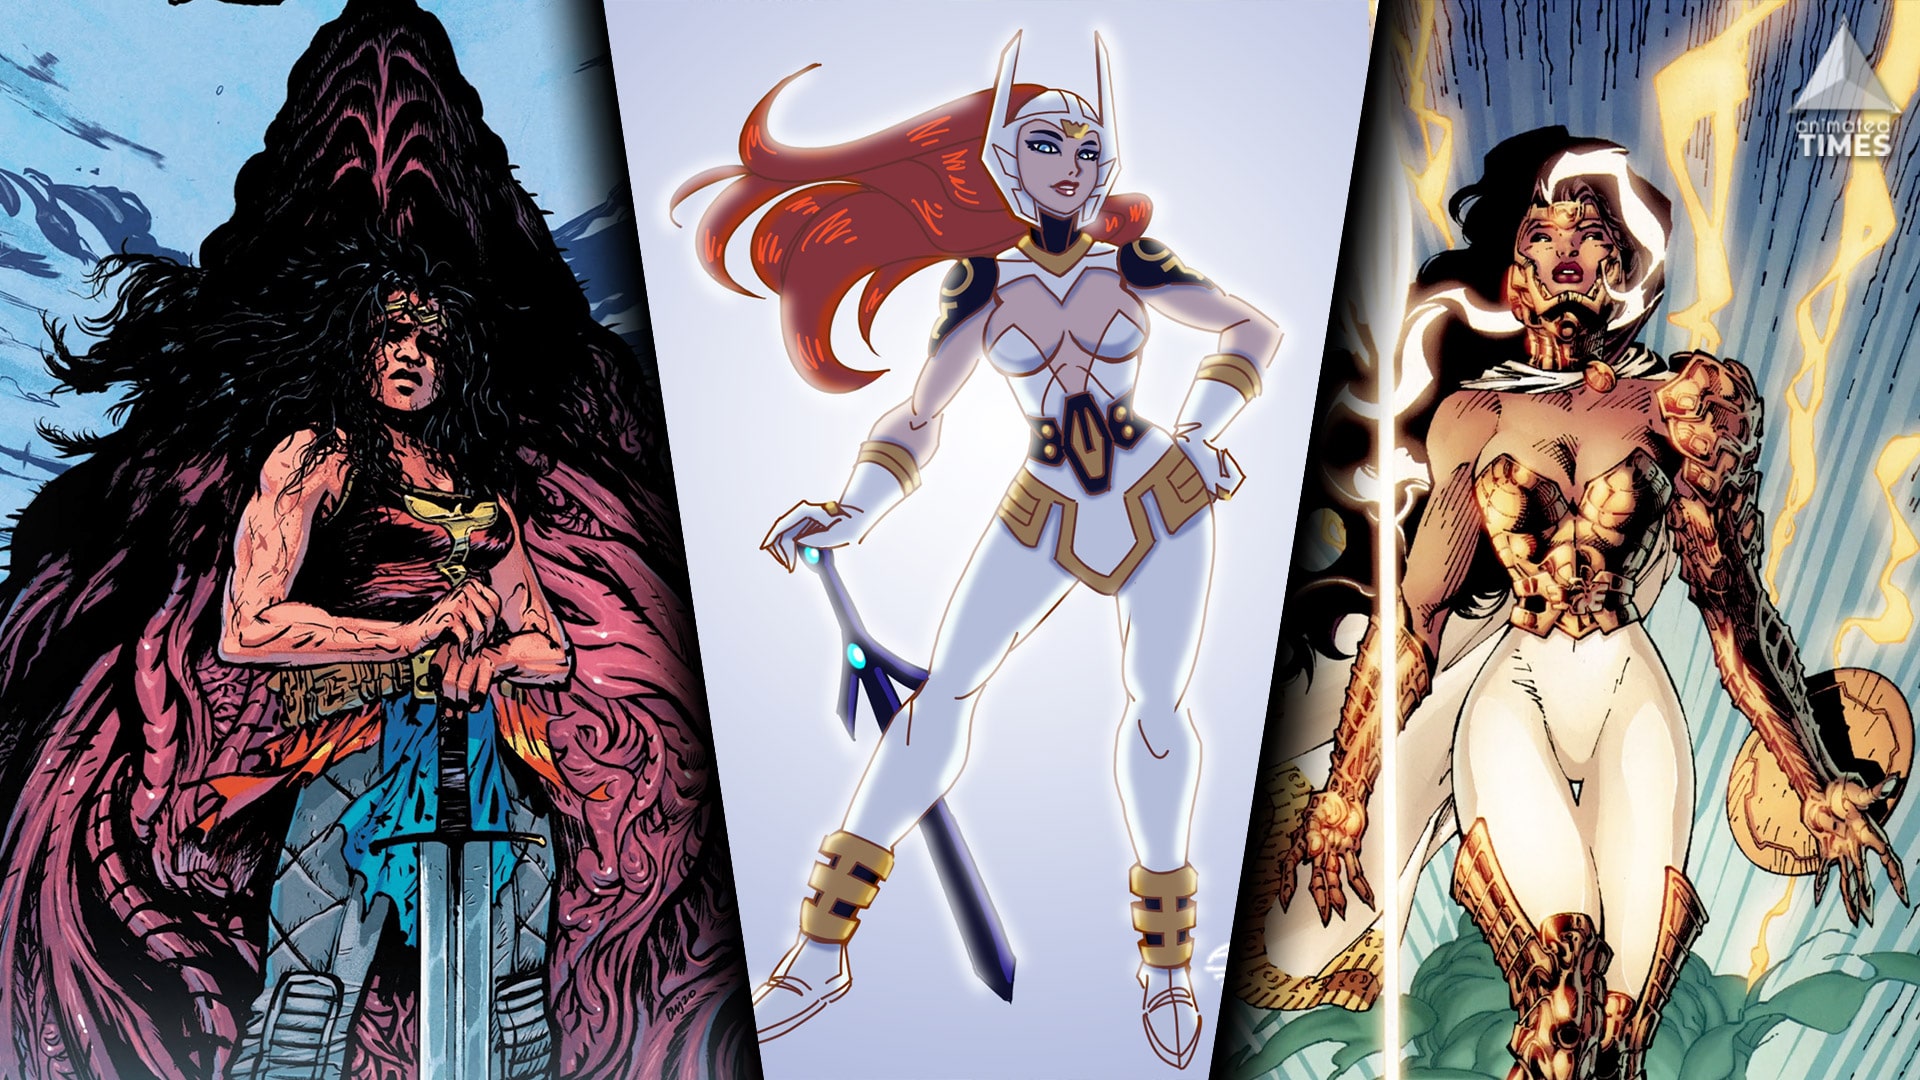 The 10 Most Badass Versions of Wonder Woman Across the Multiverse